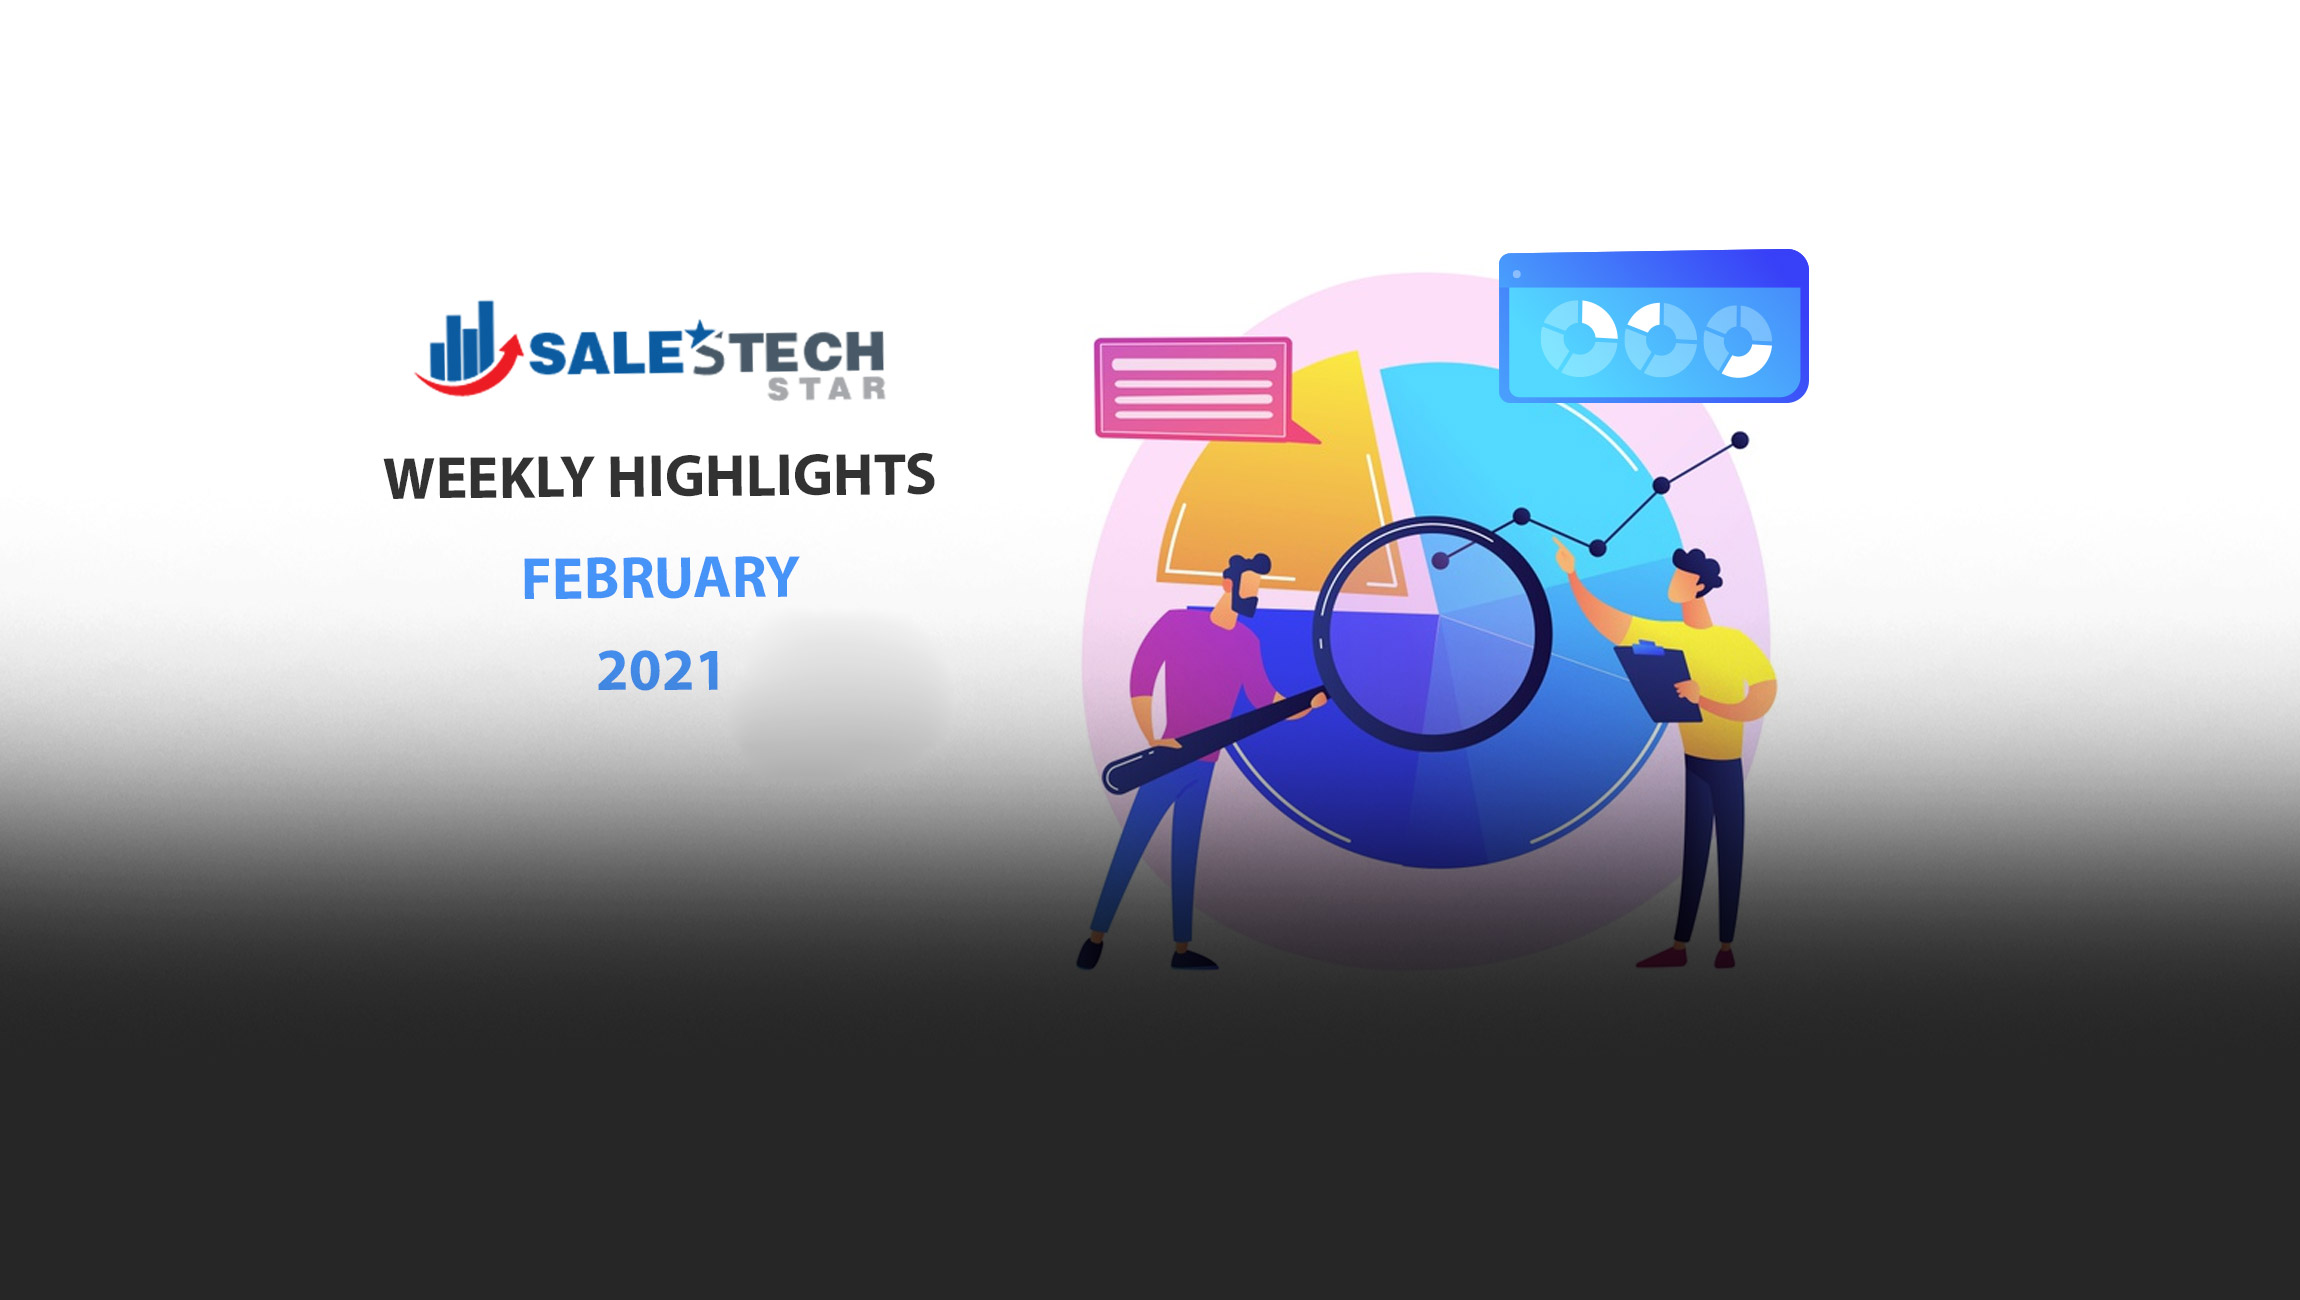 Sales Technology Highlights of The Week: 22-February-2021: Featuring Pepsico, HP Inc, Xant, Cisco!